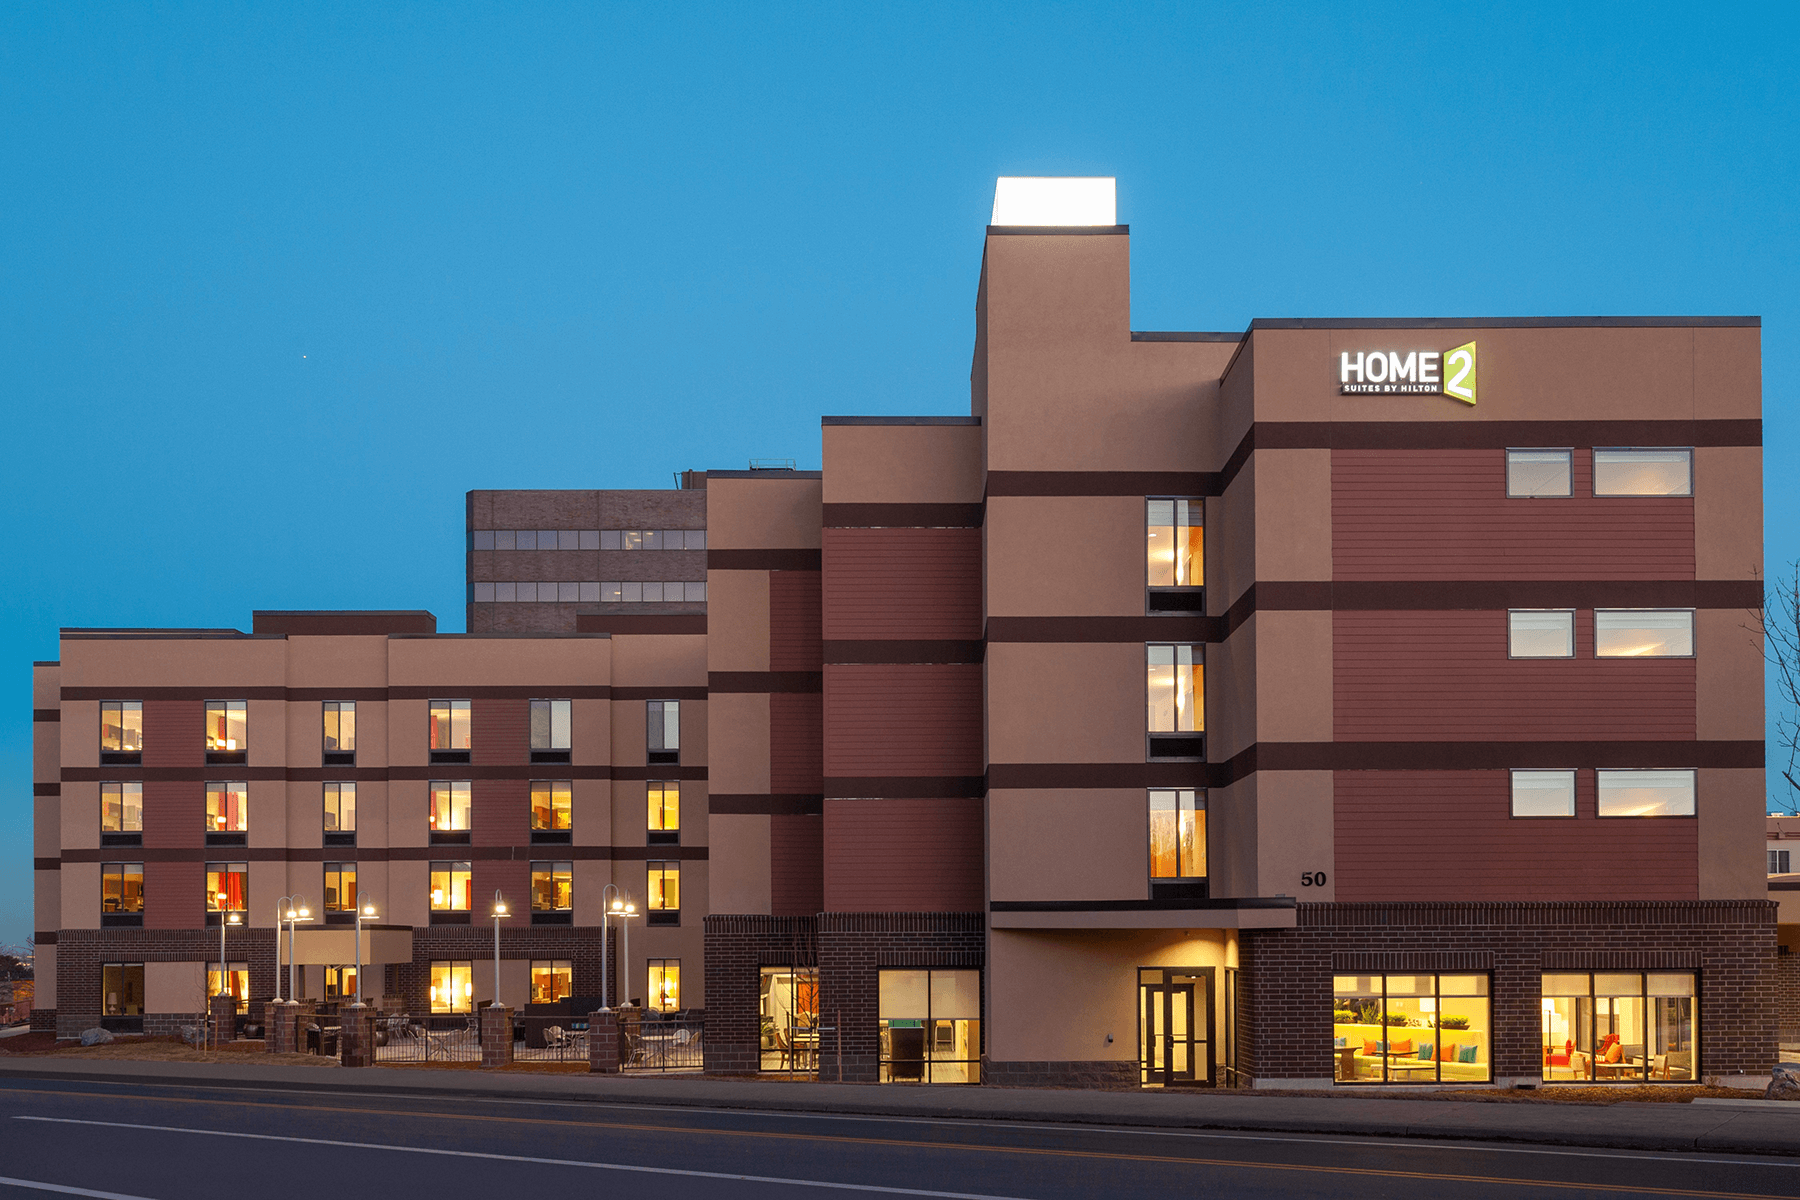  Home 2 Suites exterior at night 